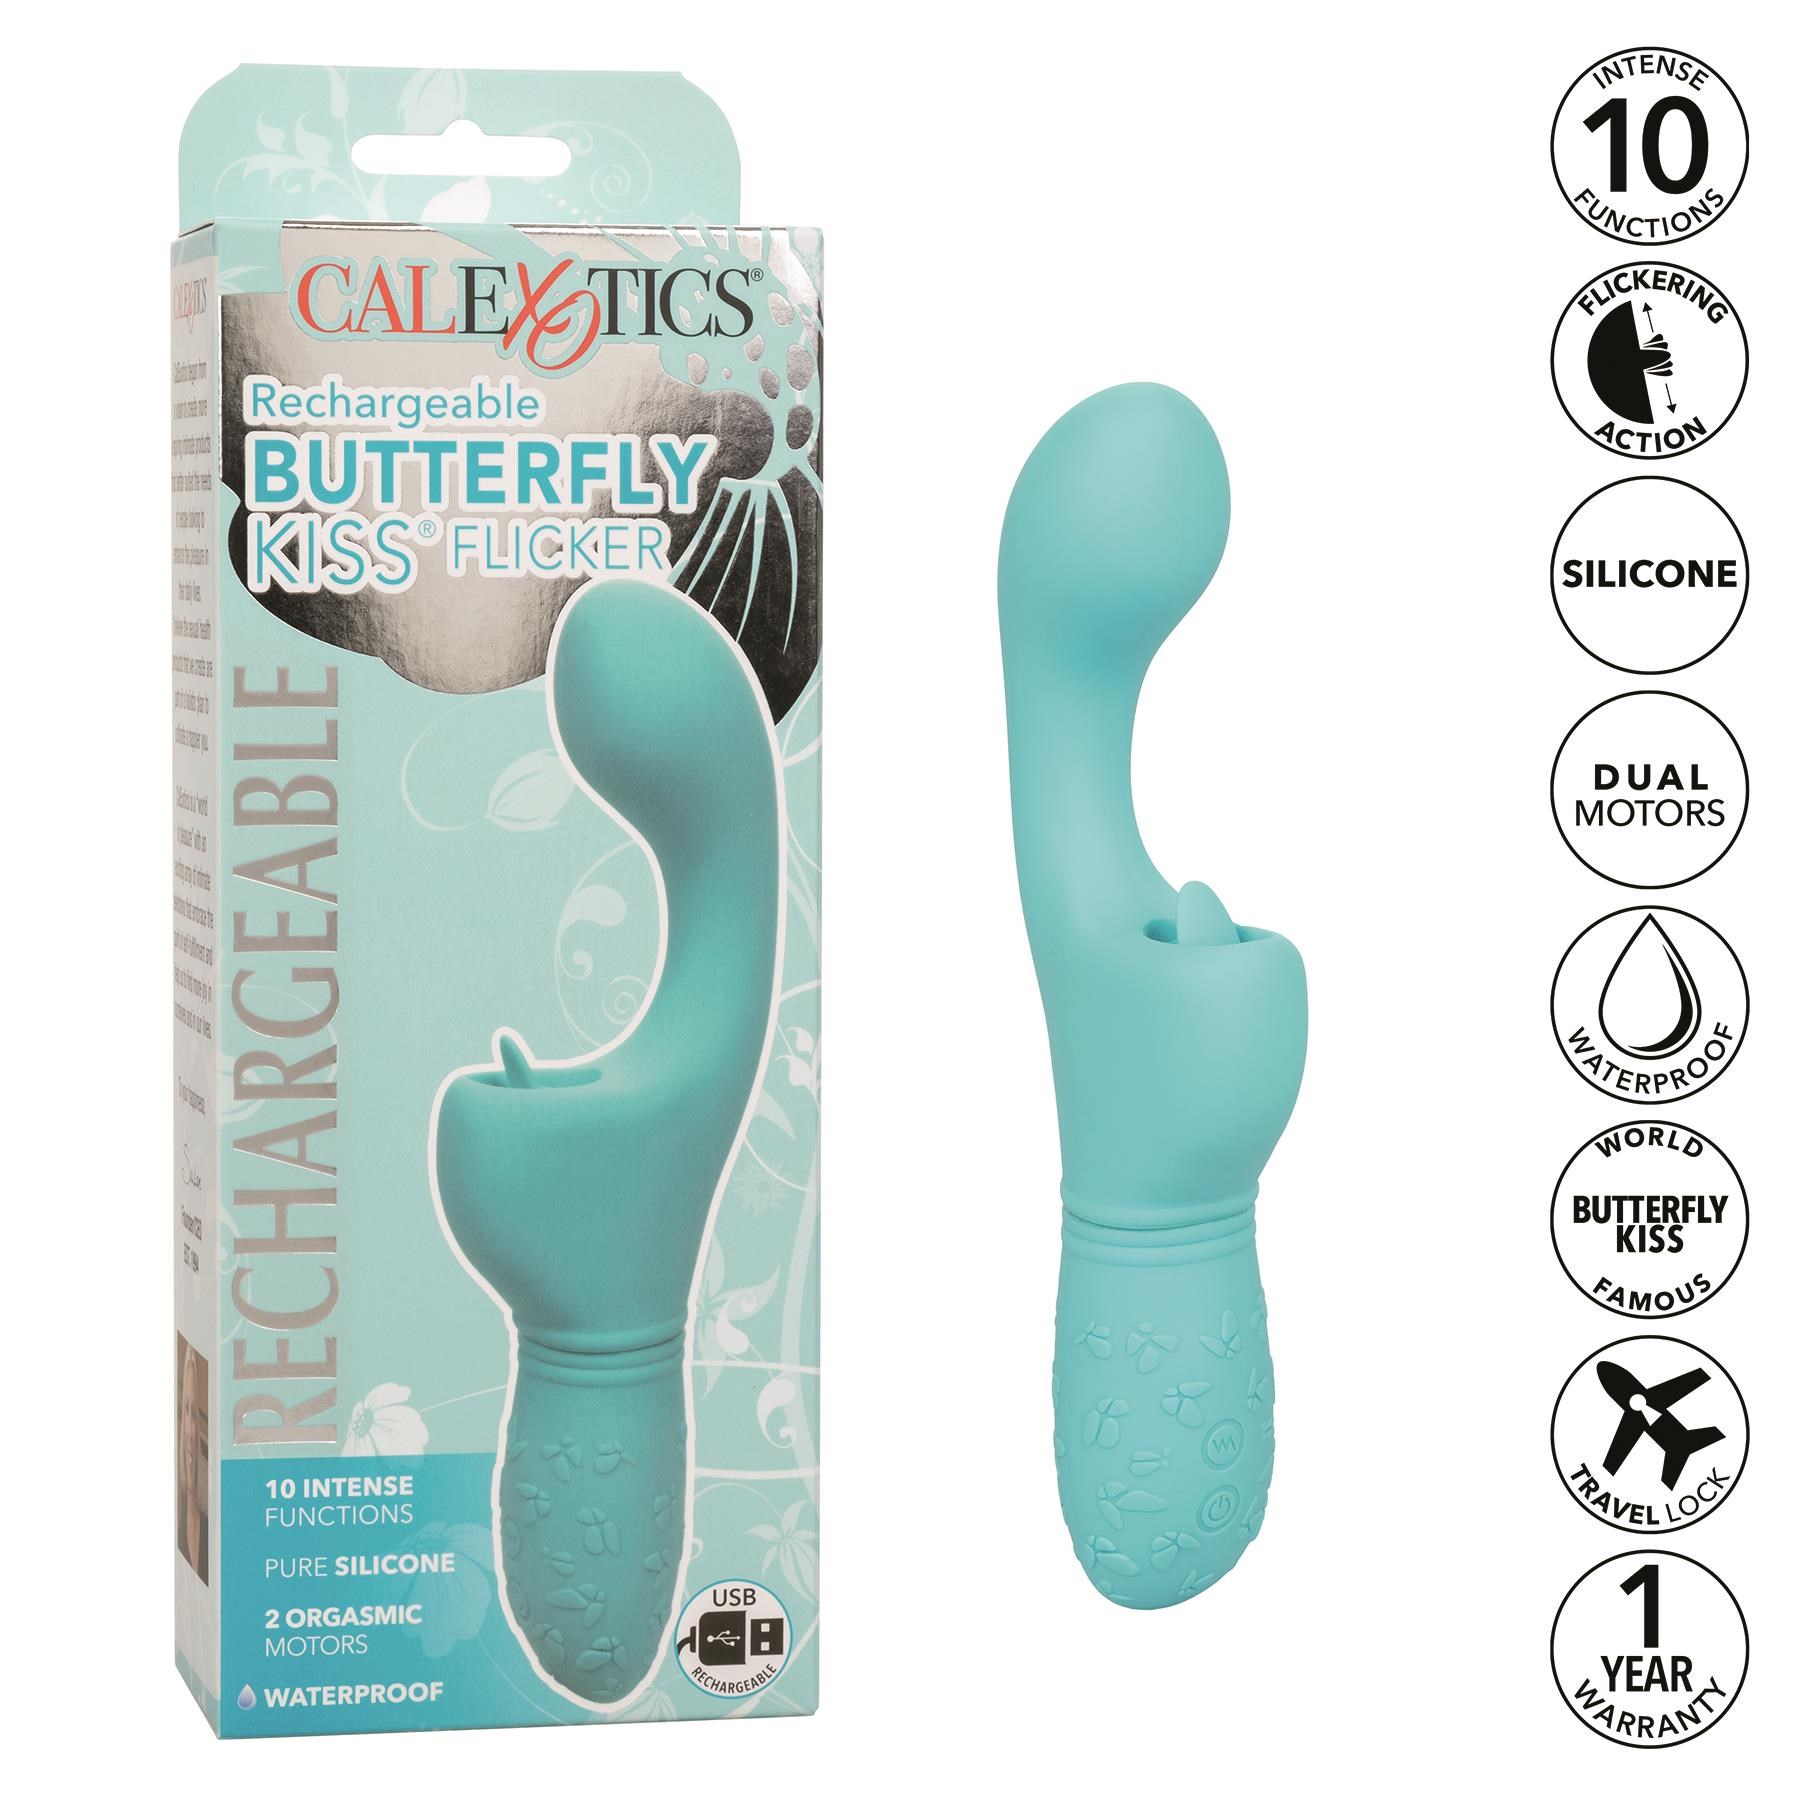 Butterfly Kiss Rechargeable Flicker - Features